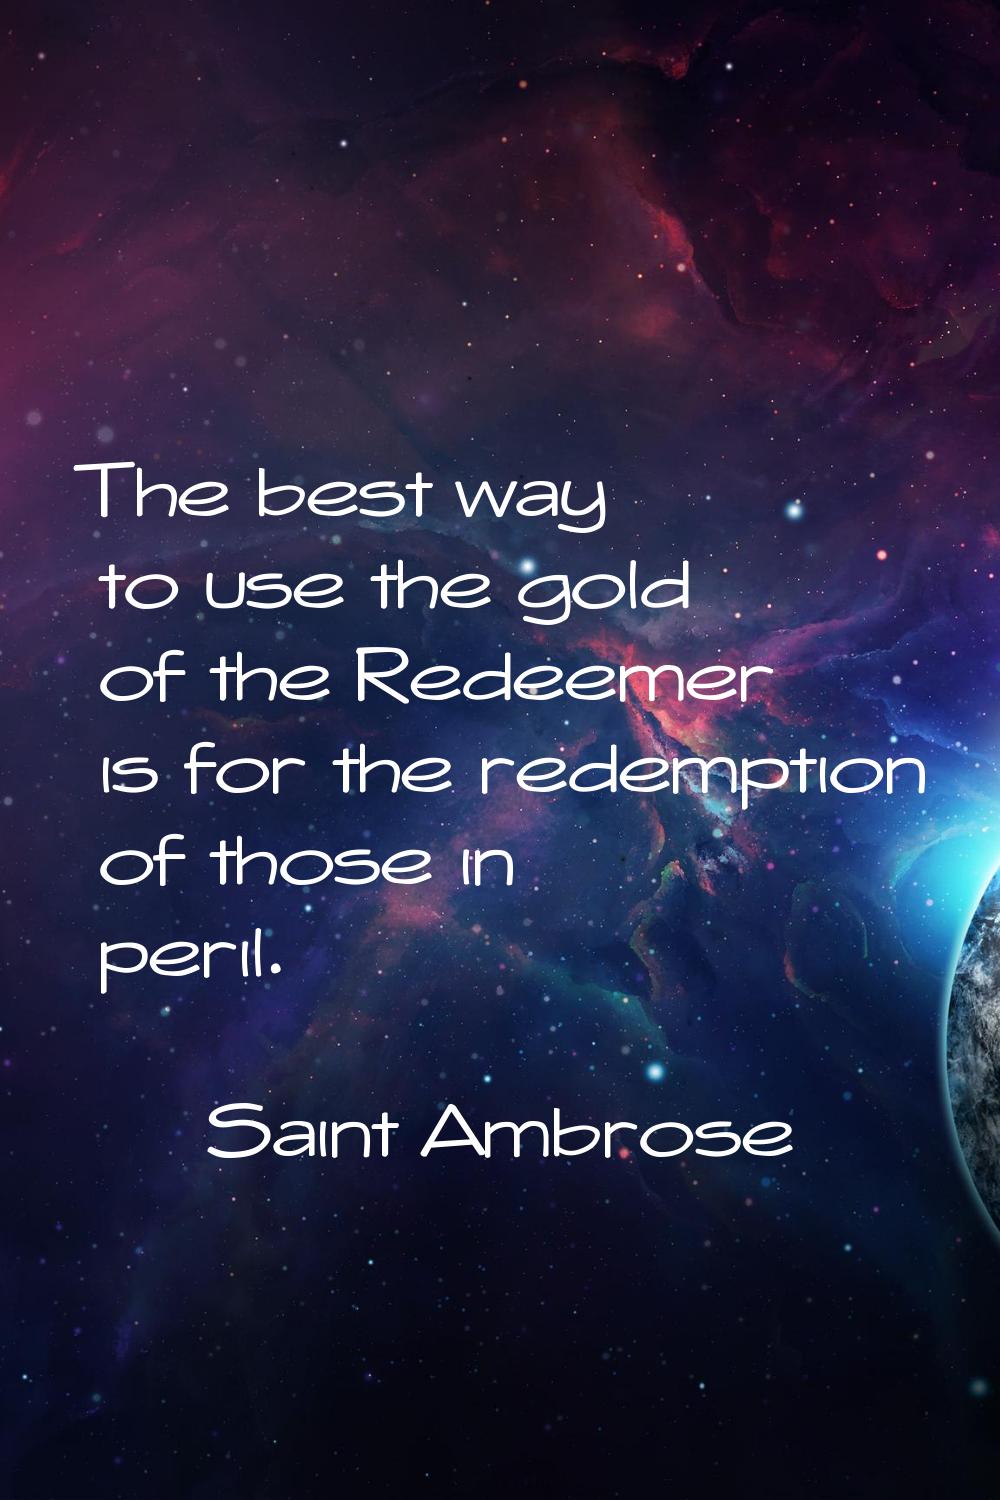 The best way to use the gold of the Redeemer is for the redemption of those in peril.